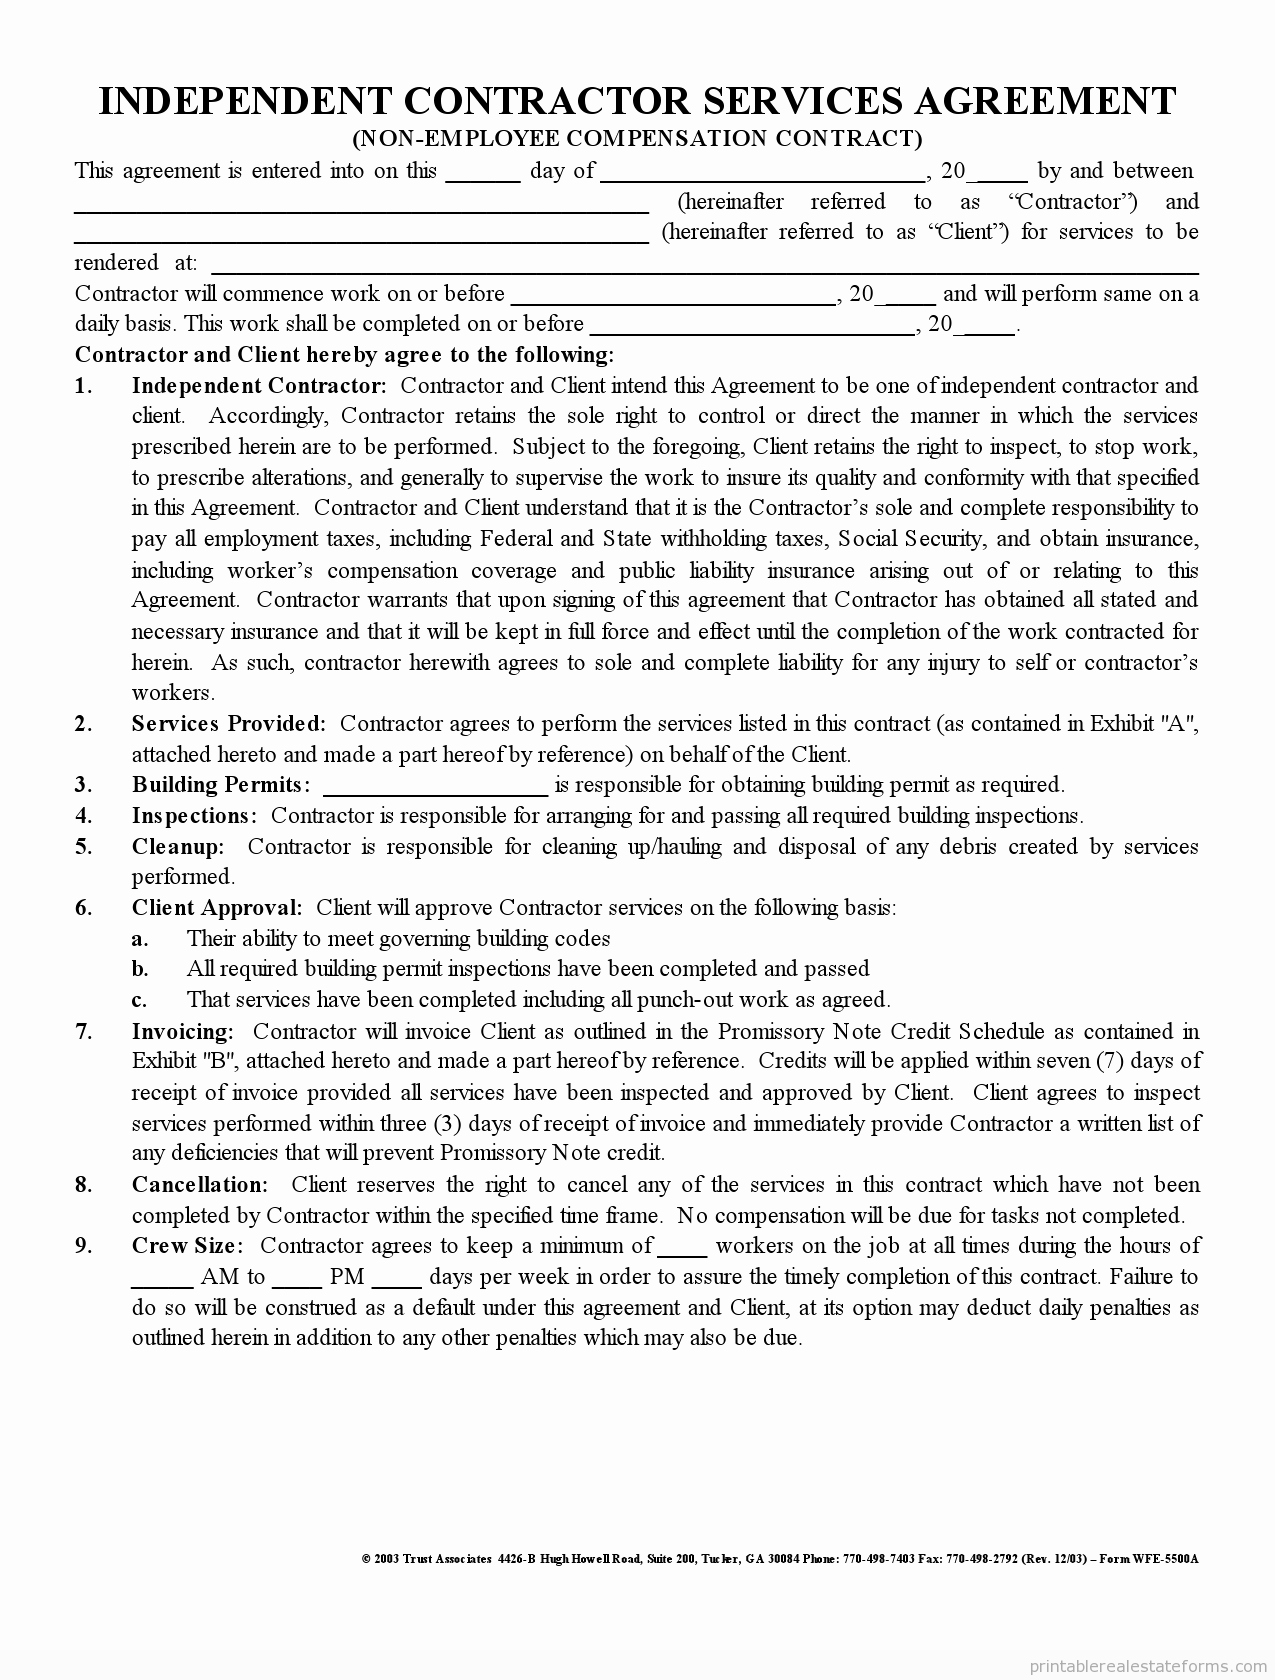 Simple Independent Contractor Agreement Template Elegant Blank Independent Contractor Agreement